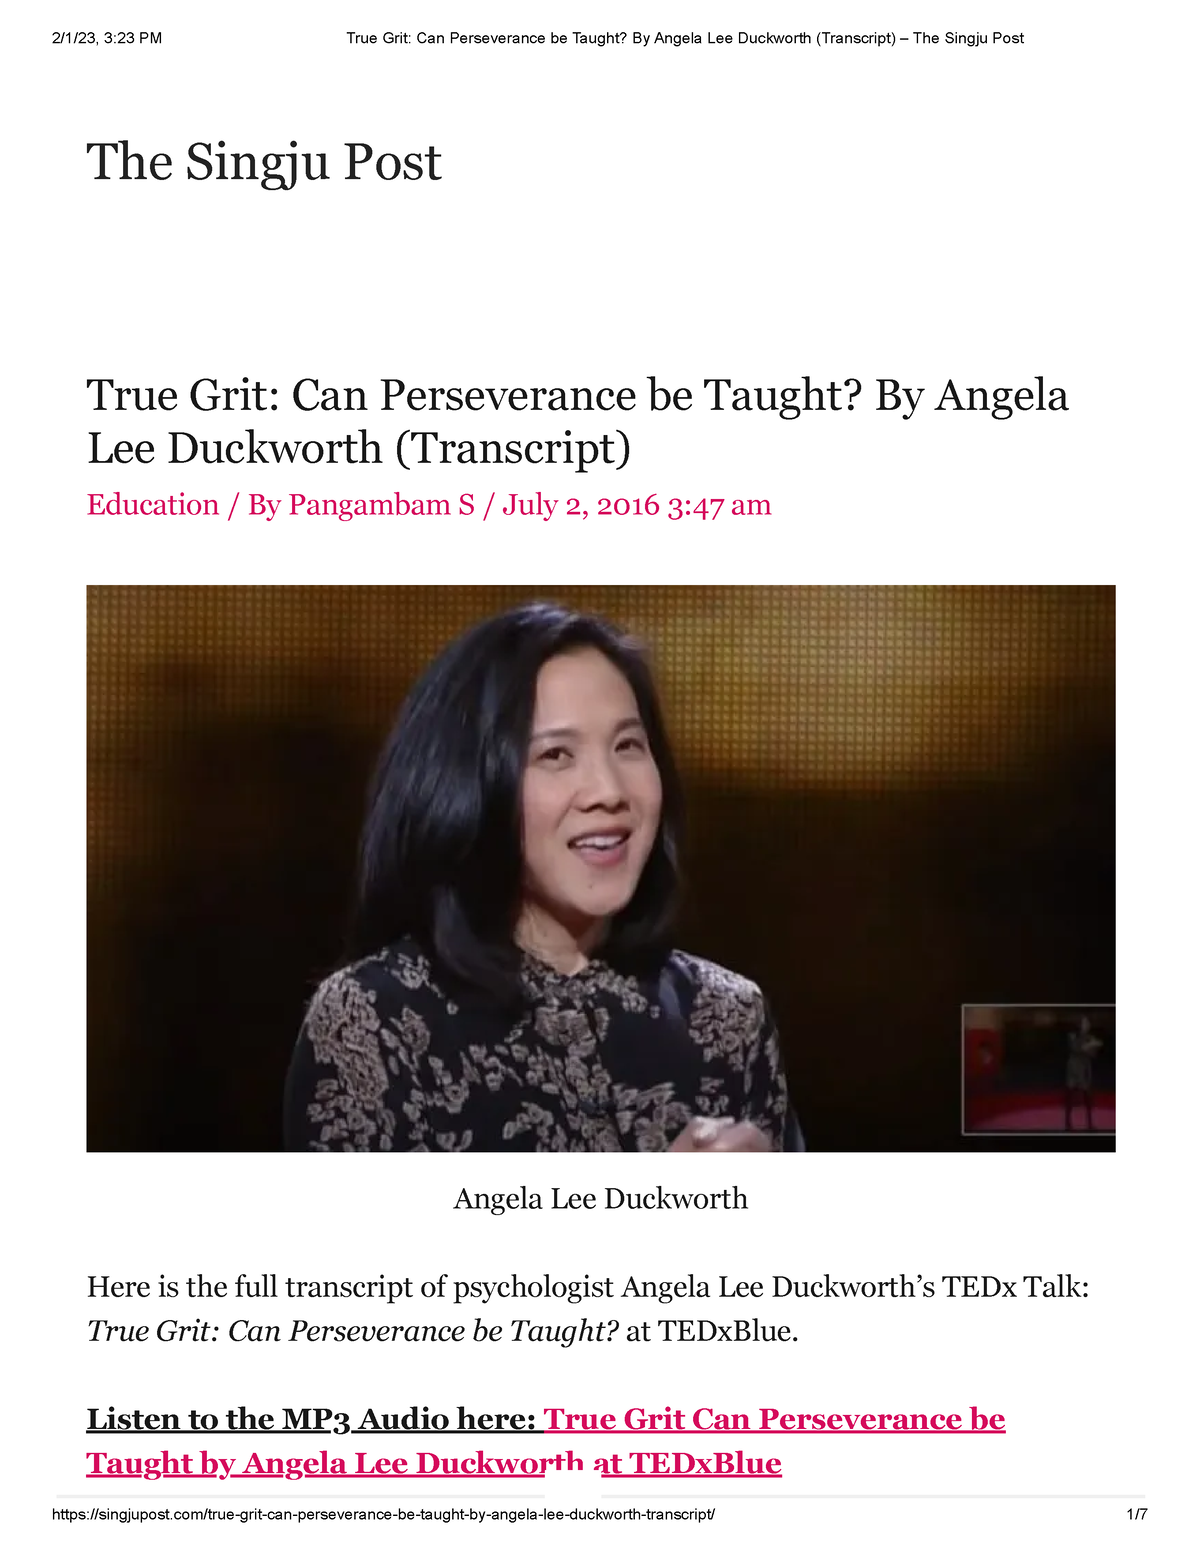 True Grit Can Perseverance be Taught By Angela Lee Duckworth (Transcript) –  The Singju Post - Studocu